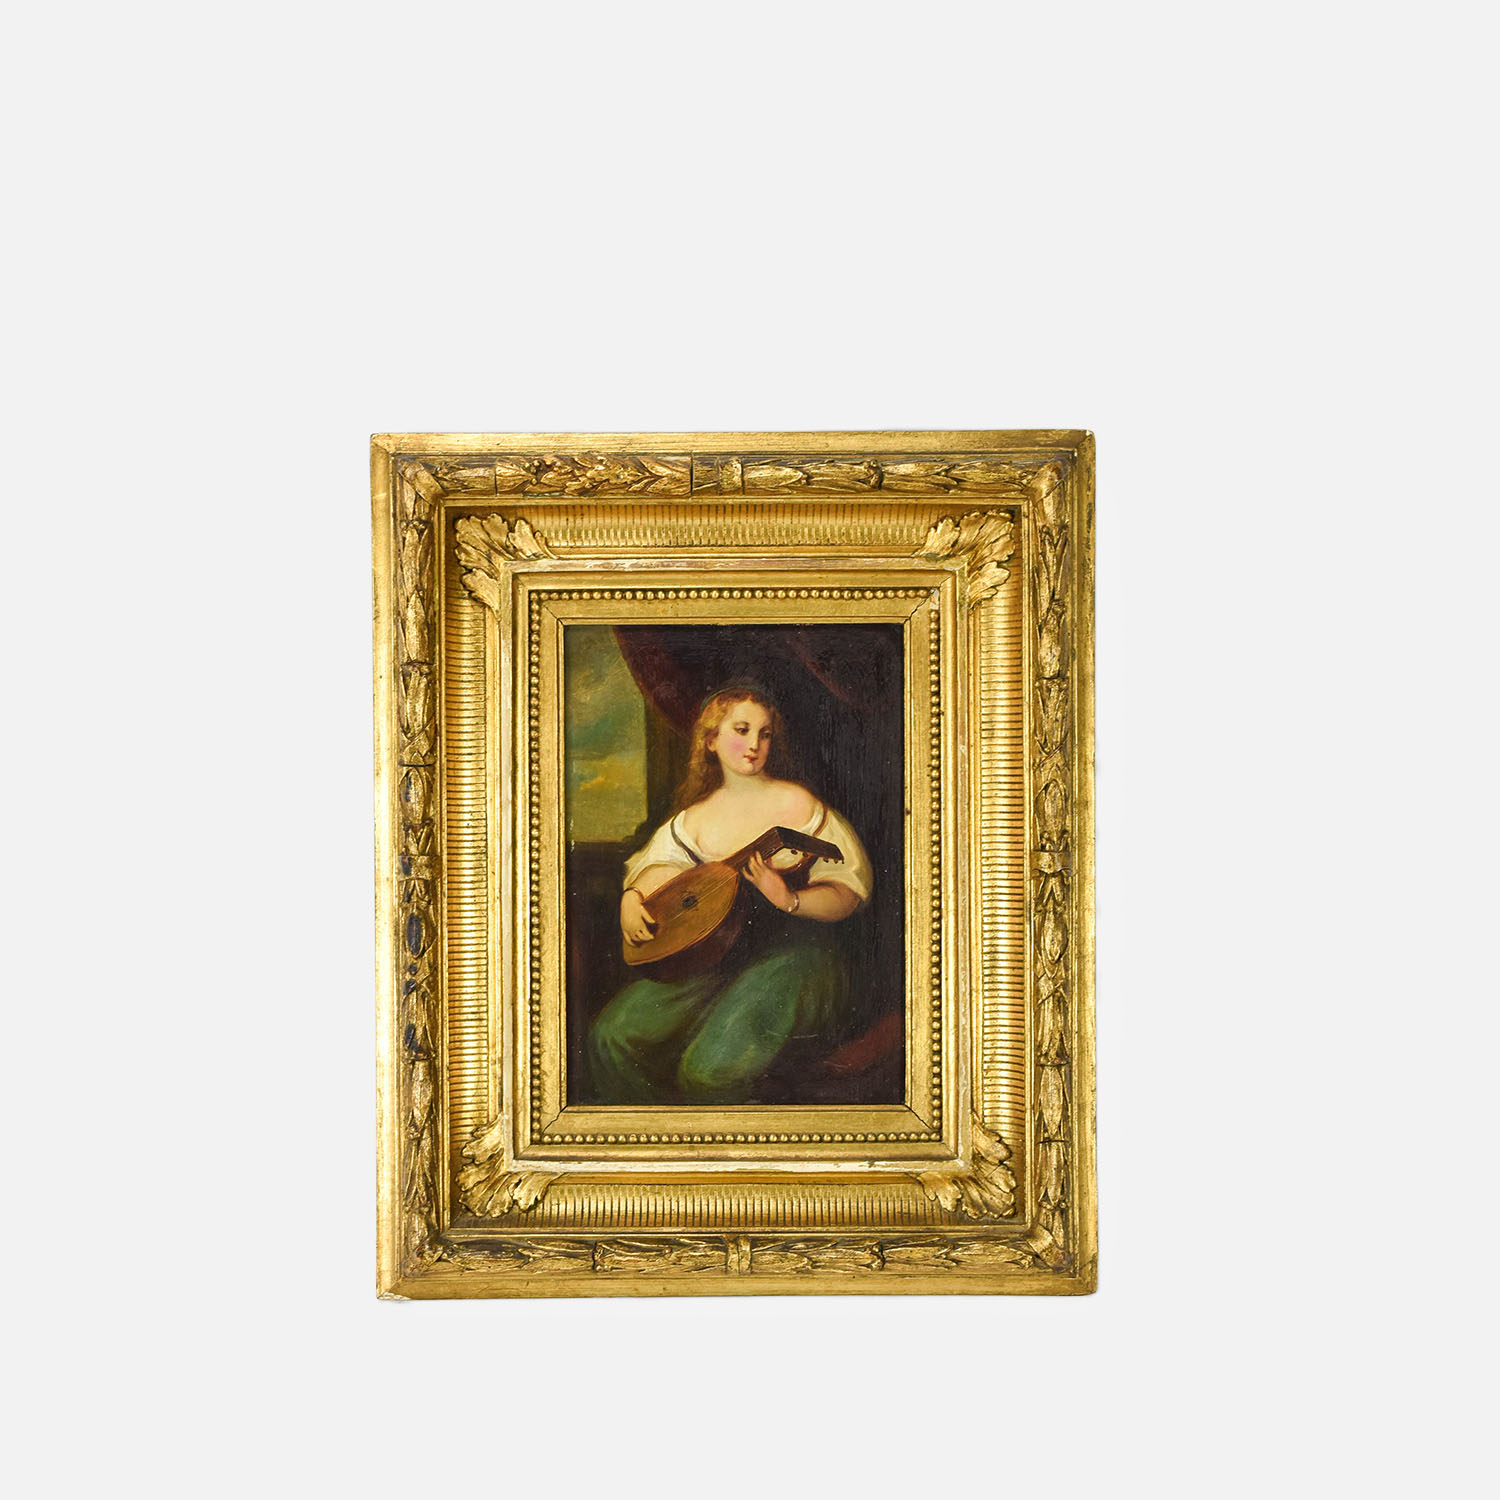 Antique 19thc Oil Painting on Board Renaissance Woman Playing Lute